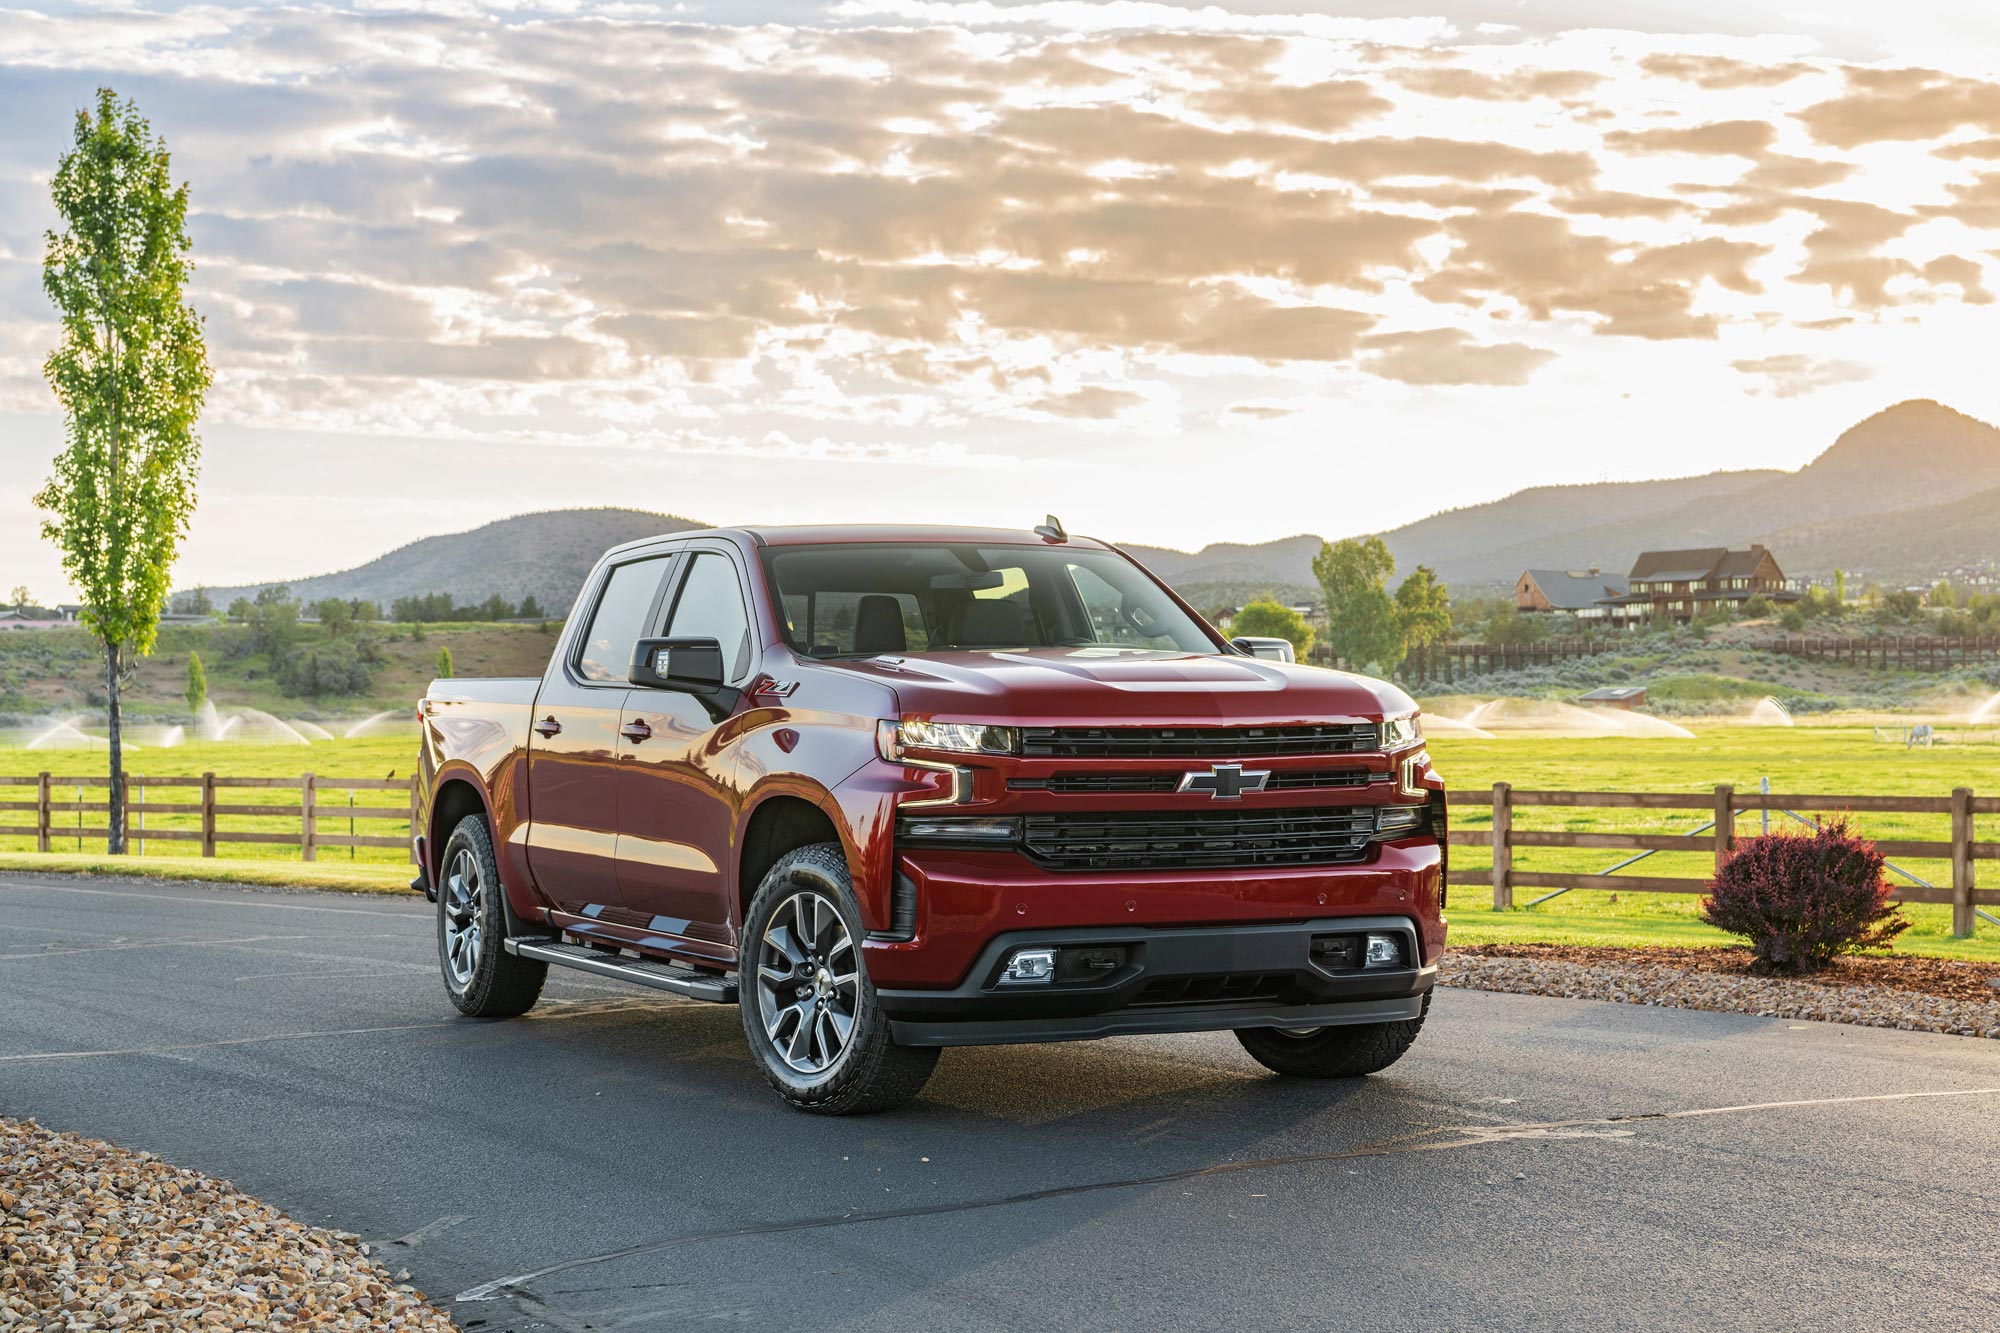 2023 Chevrolet Silverado parked on a road by a small field.